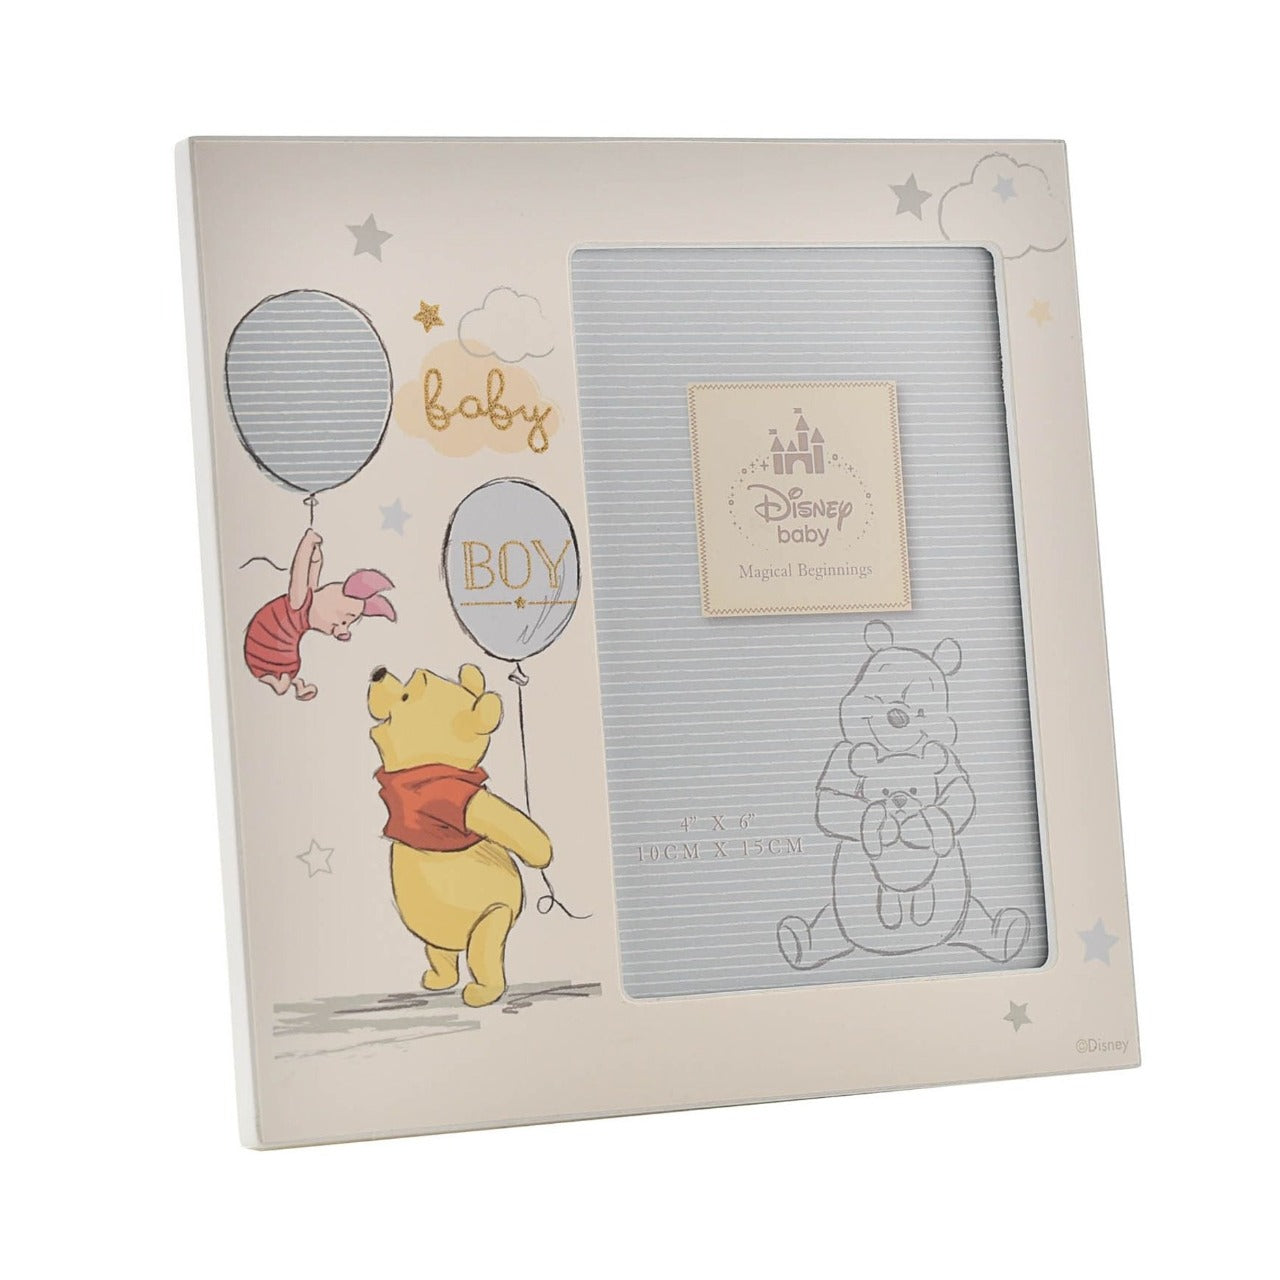 Disney Magical Beginnings 4" x 6" Photo Frame Pooh Baby Boy  Add a touch of Disney magic to their everyday with a wonderful Baby Boy frame from the Magical Beginnings Collection from Classic Disney.